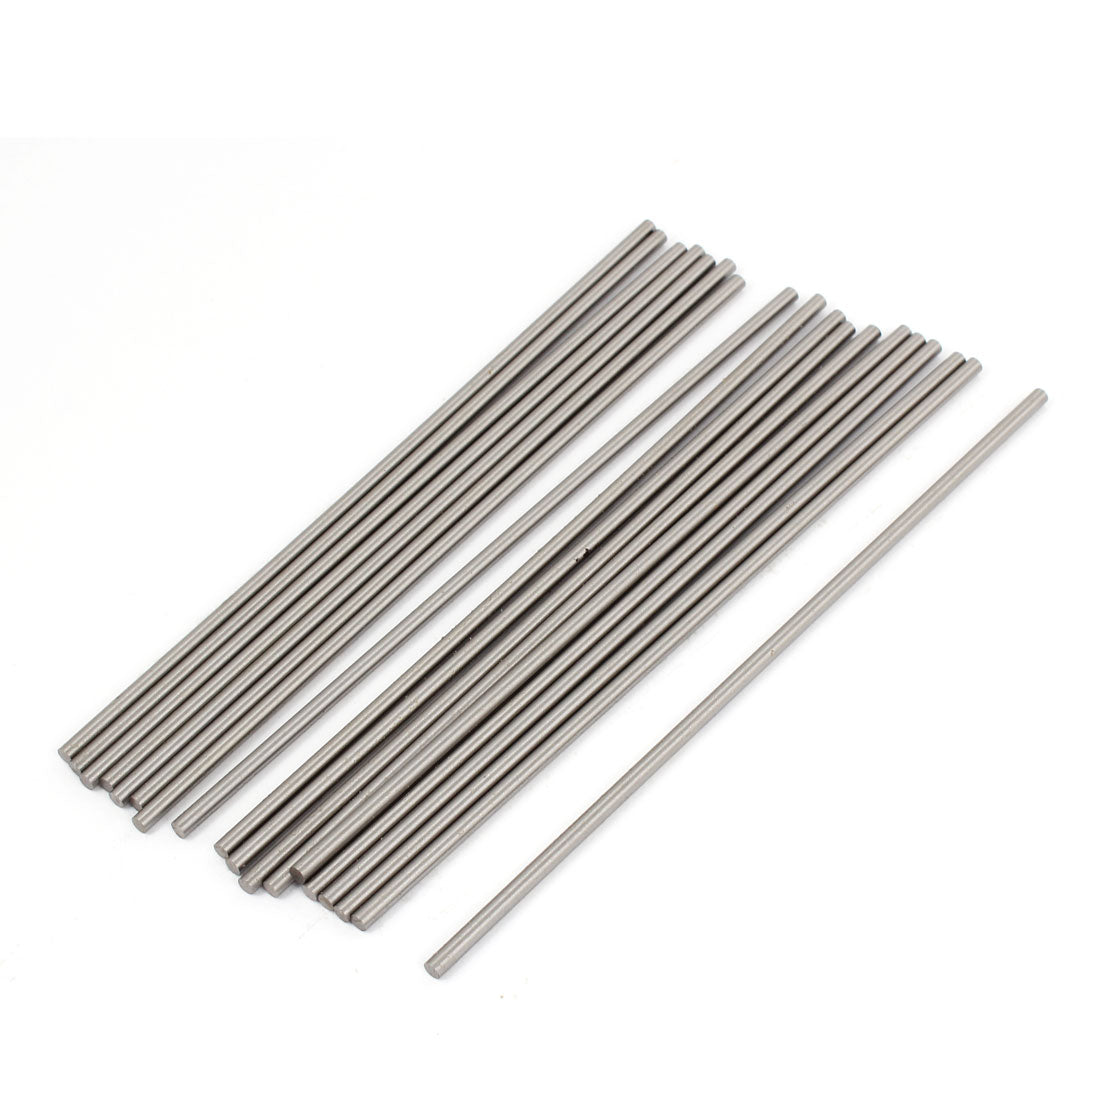 Uxcell Uxcell 20pcs HSS High Speed Steel Turning Carbide Bars for CNC Lathe 3mmx150mm